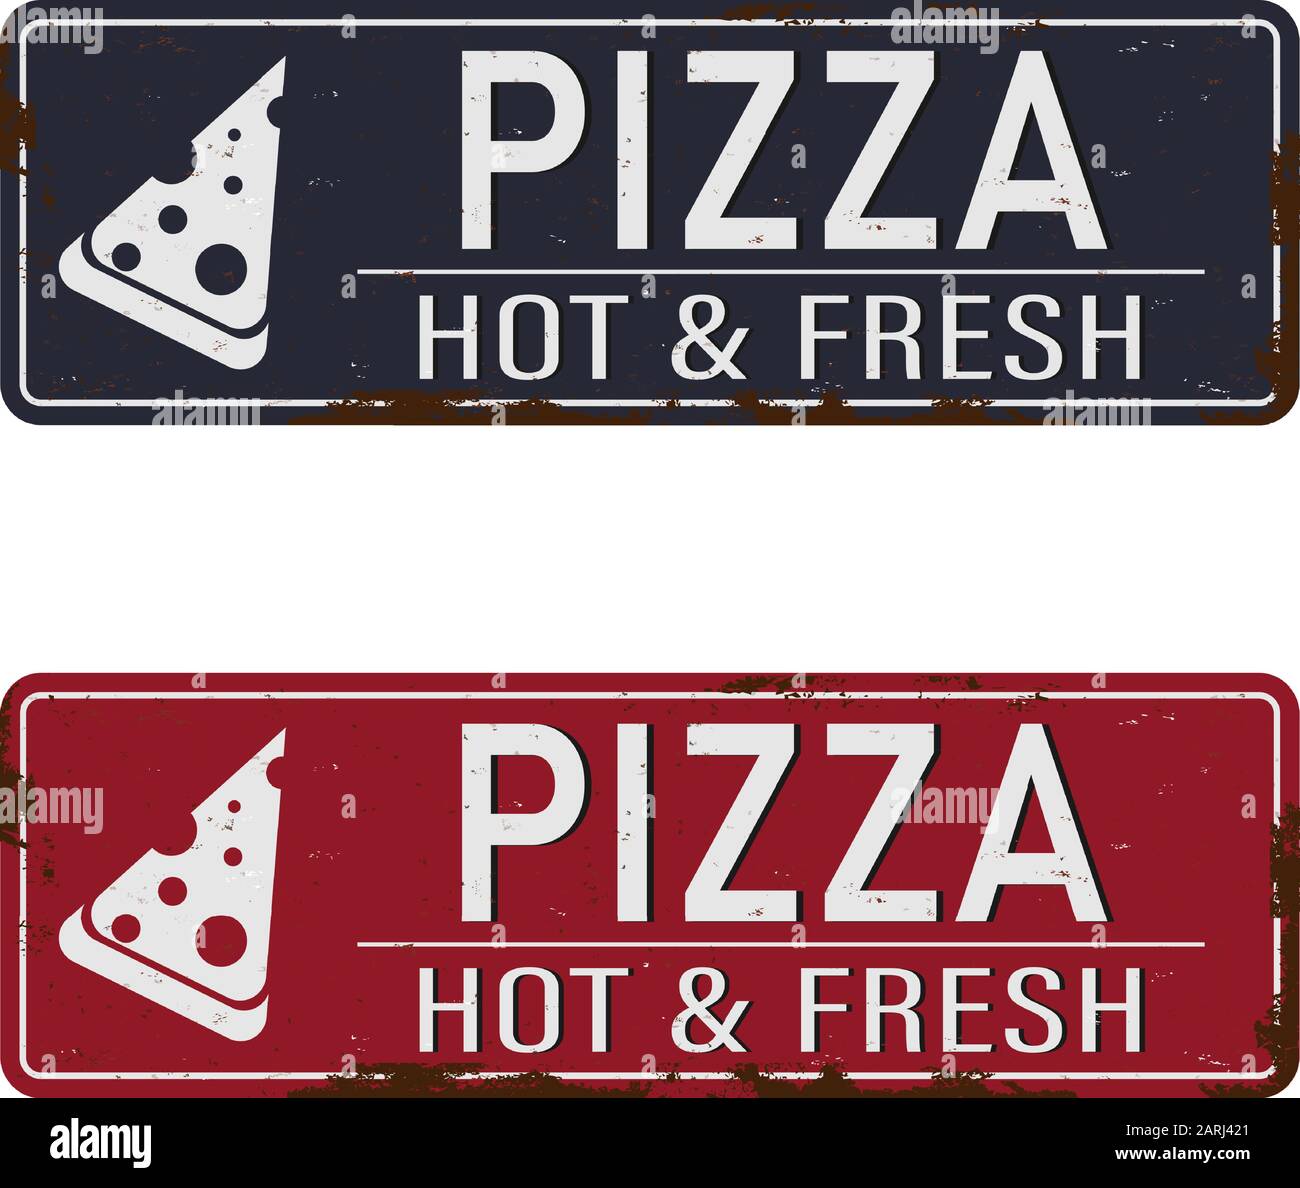 Pizza logo. hot and fresh, symbol, stamp, icon, sign, food